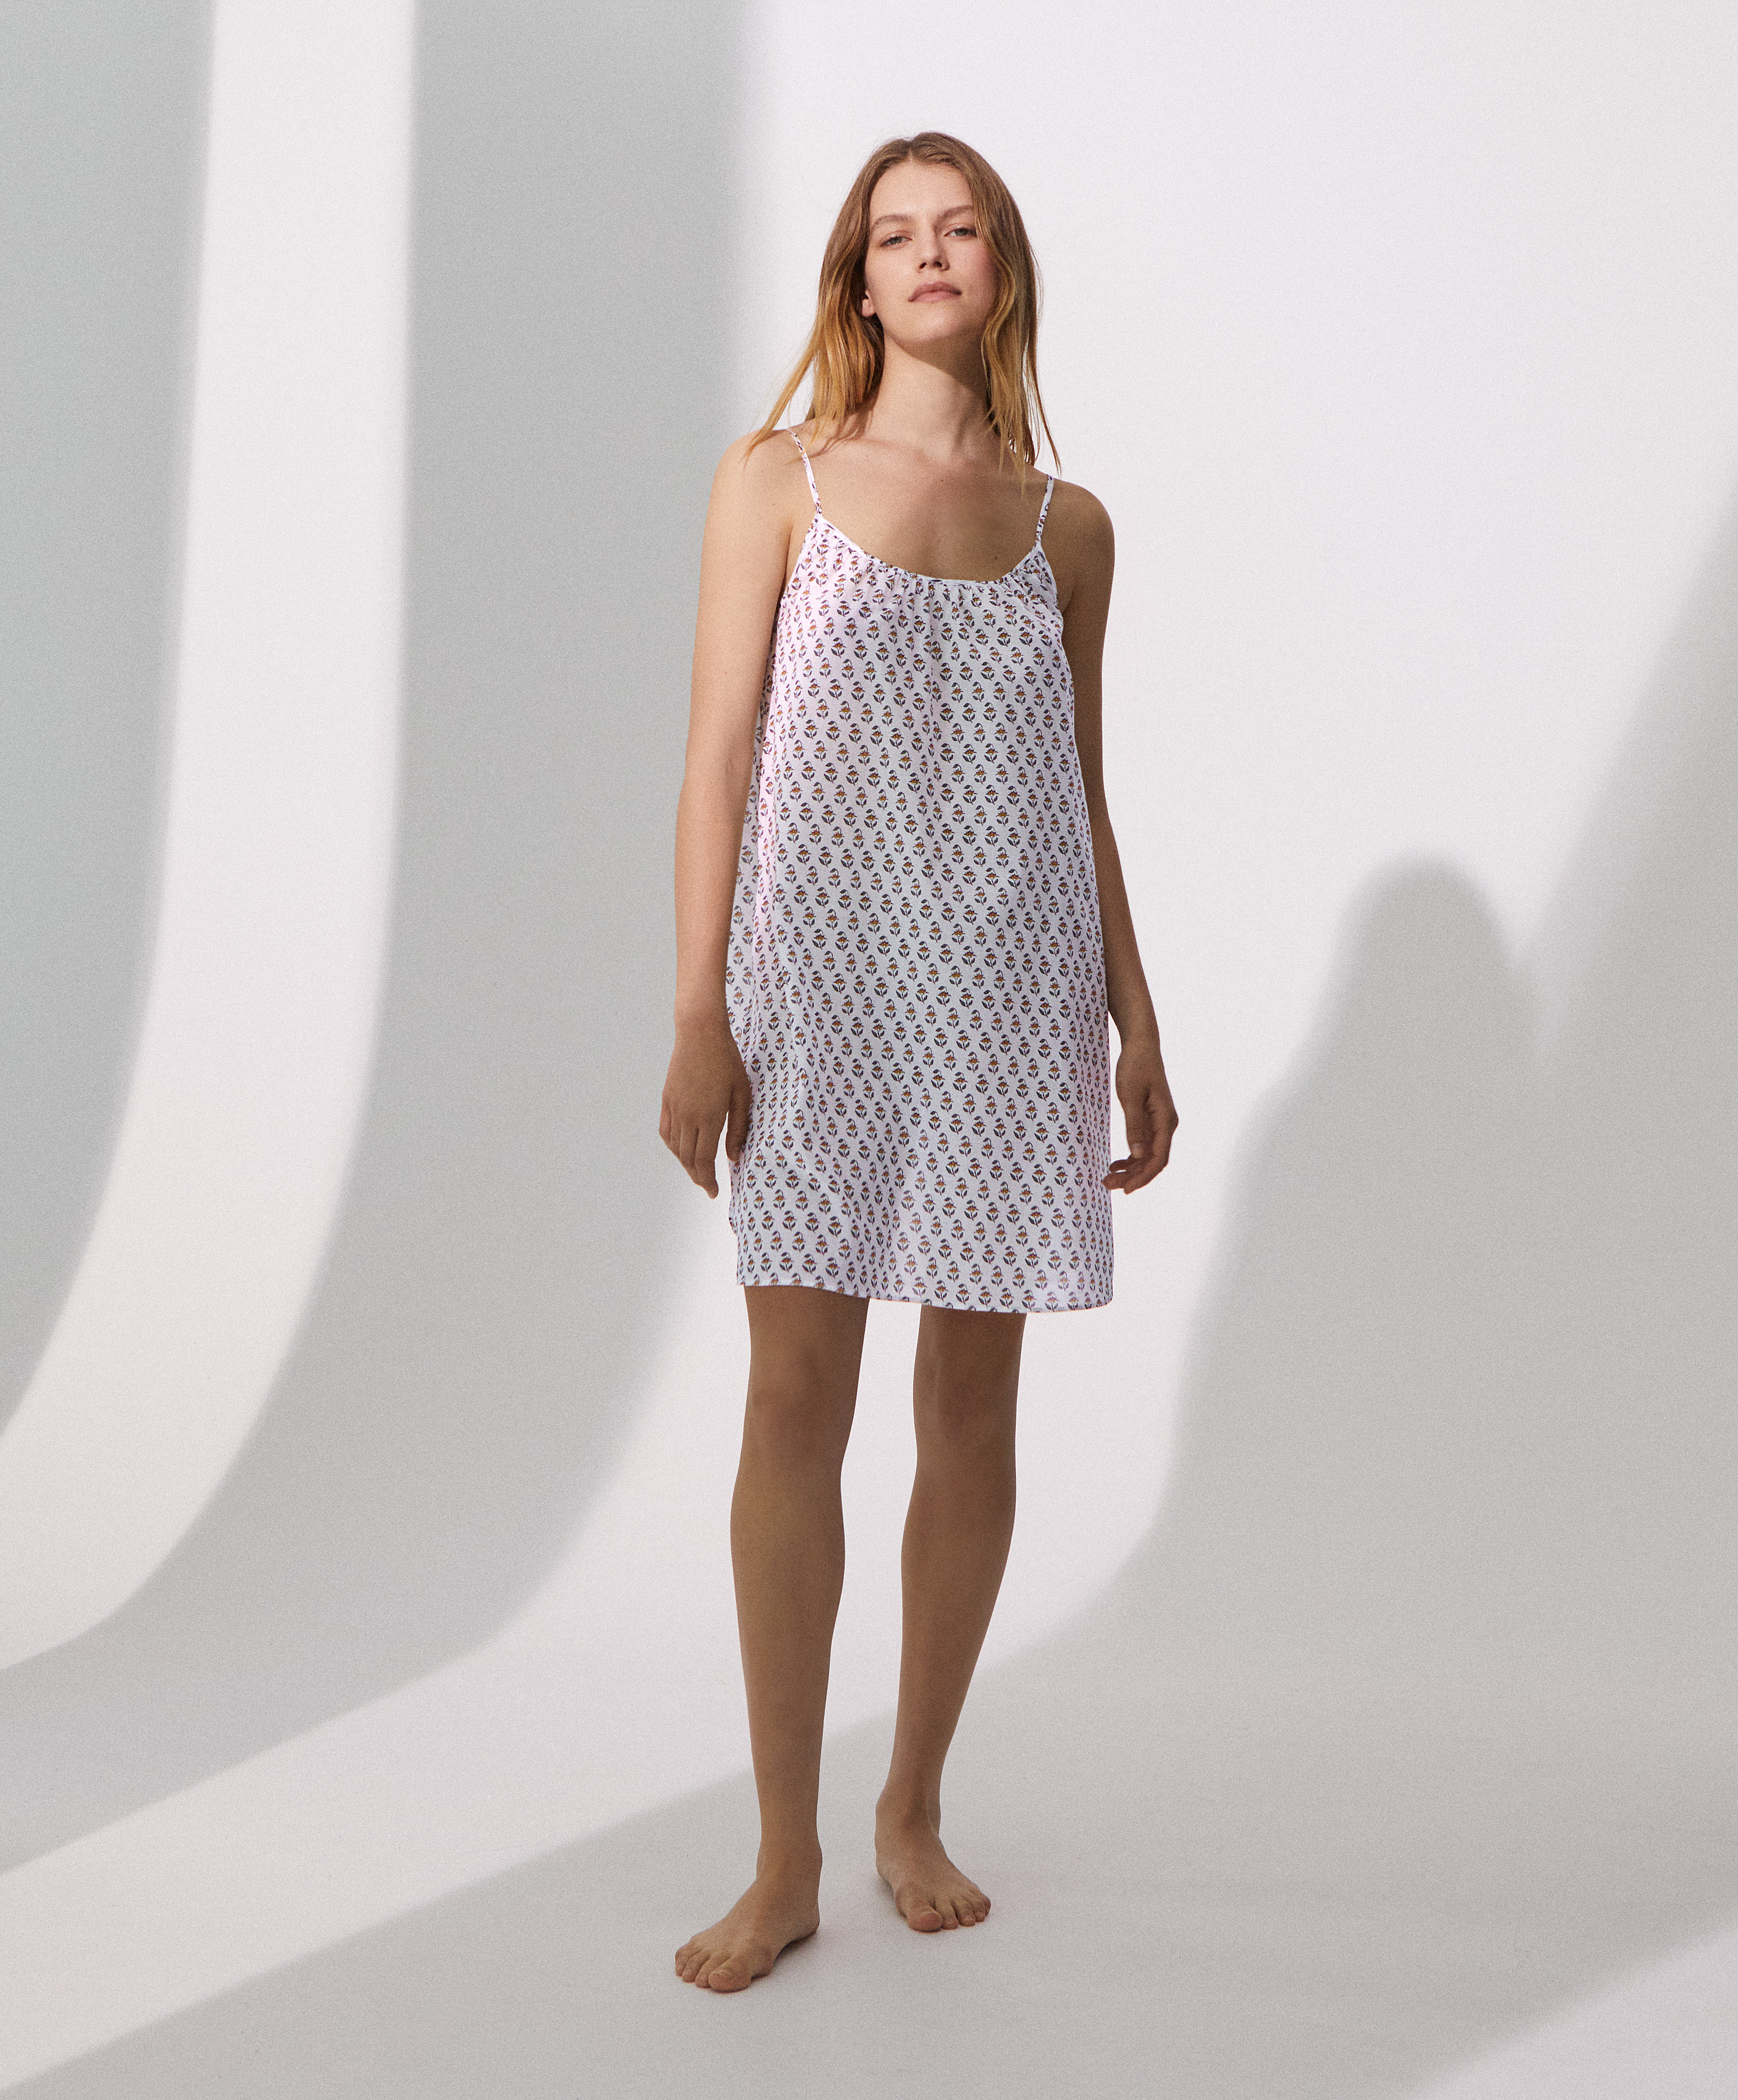 Short strappy nightdress in printed 100% cotton